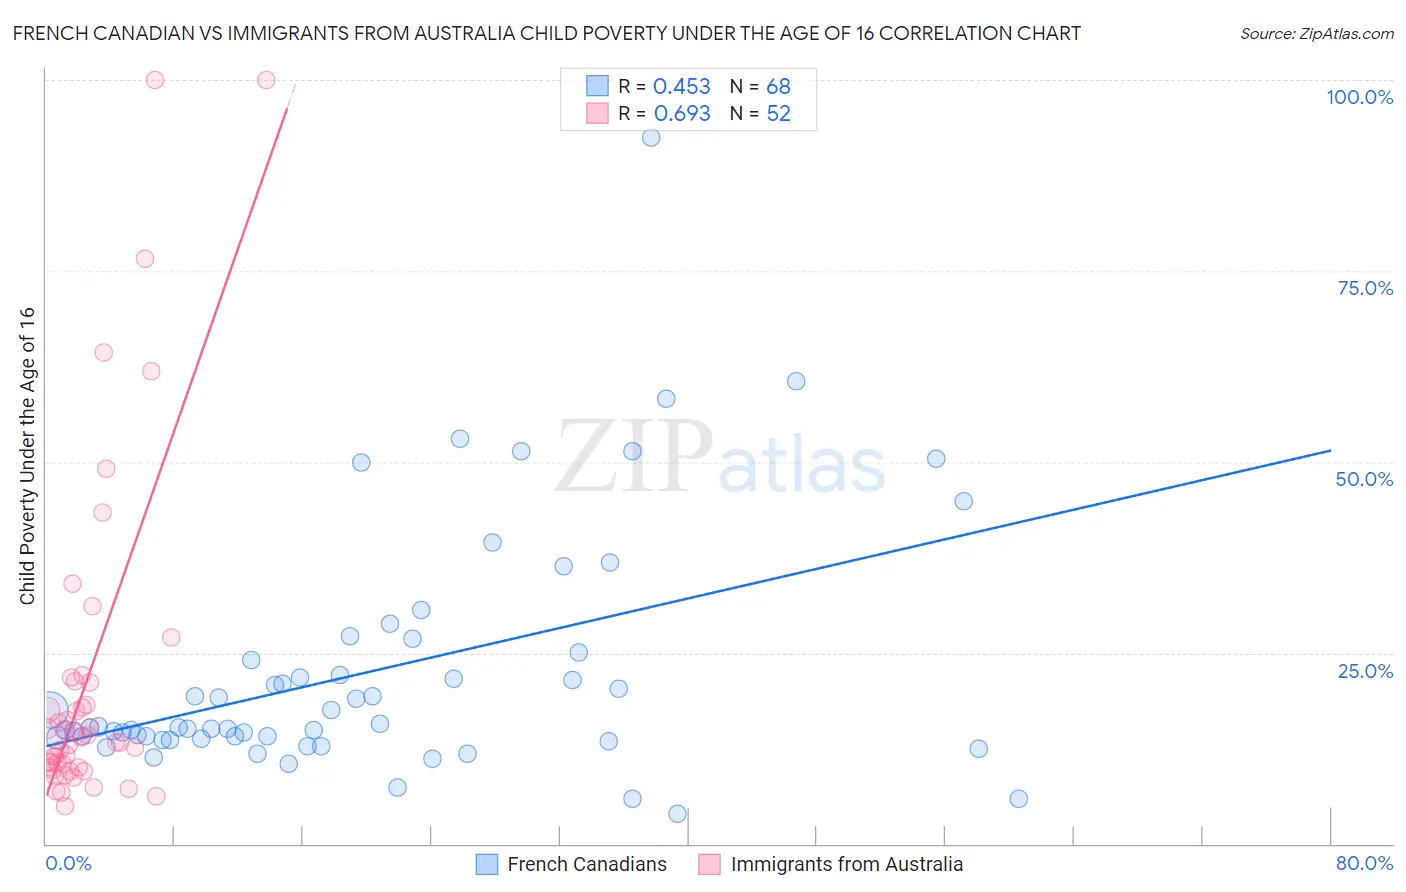 French Canadian vs Immigrants from Australia Child Poverty Under the Age of 16